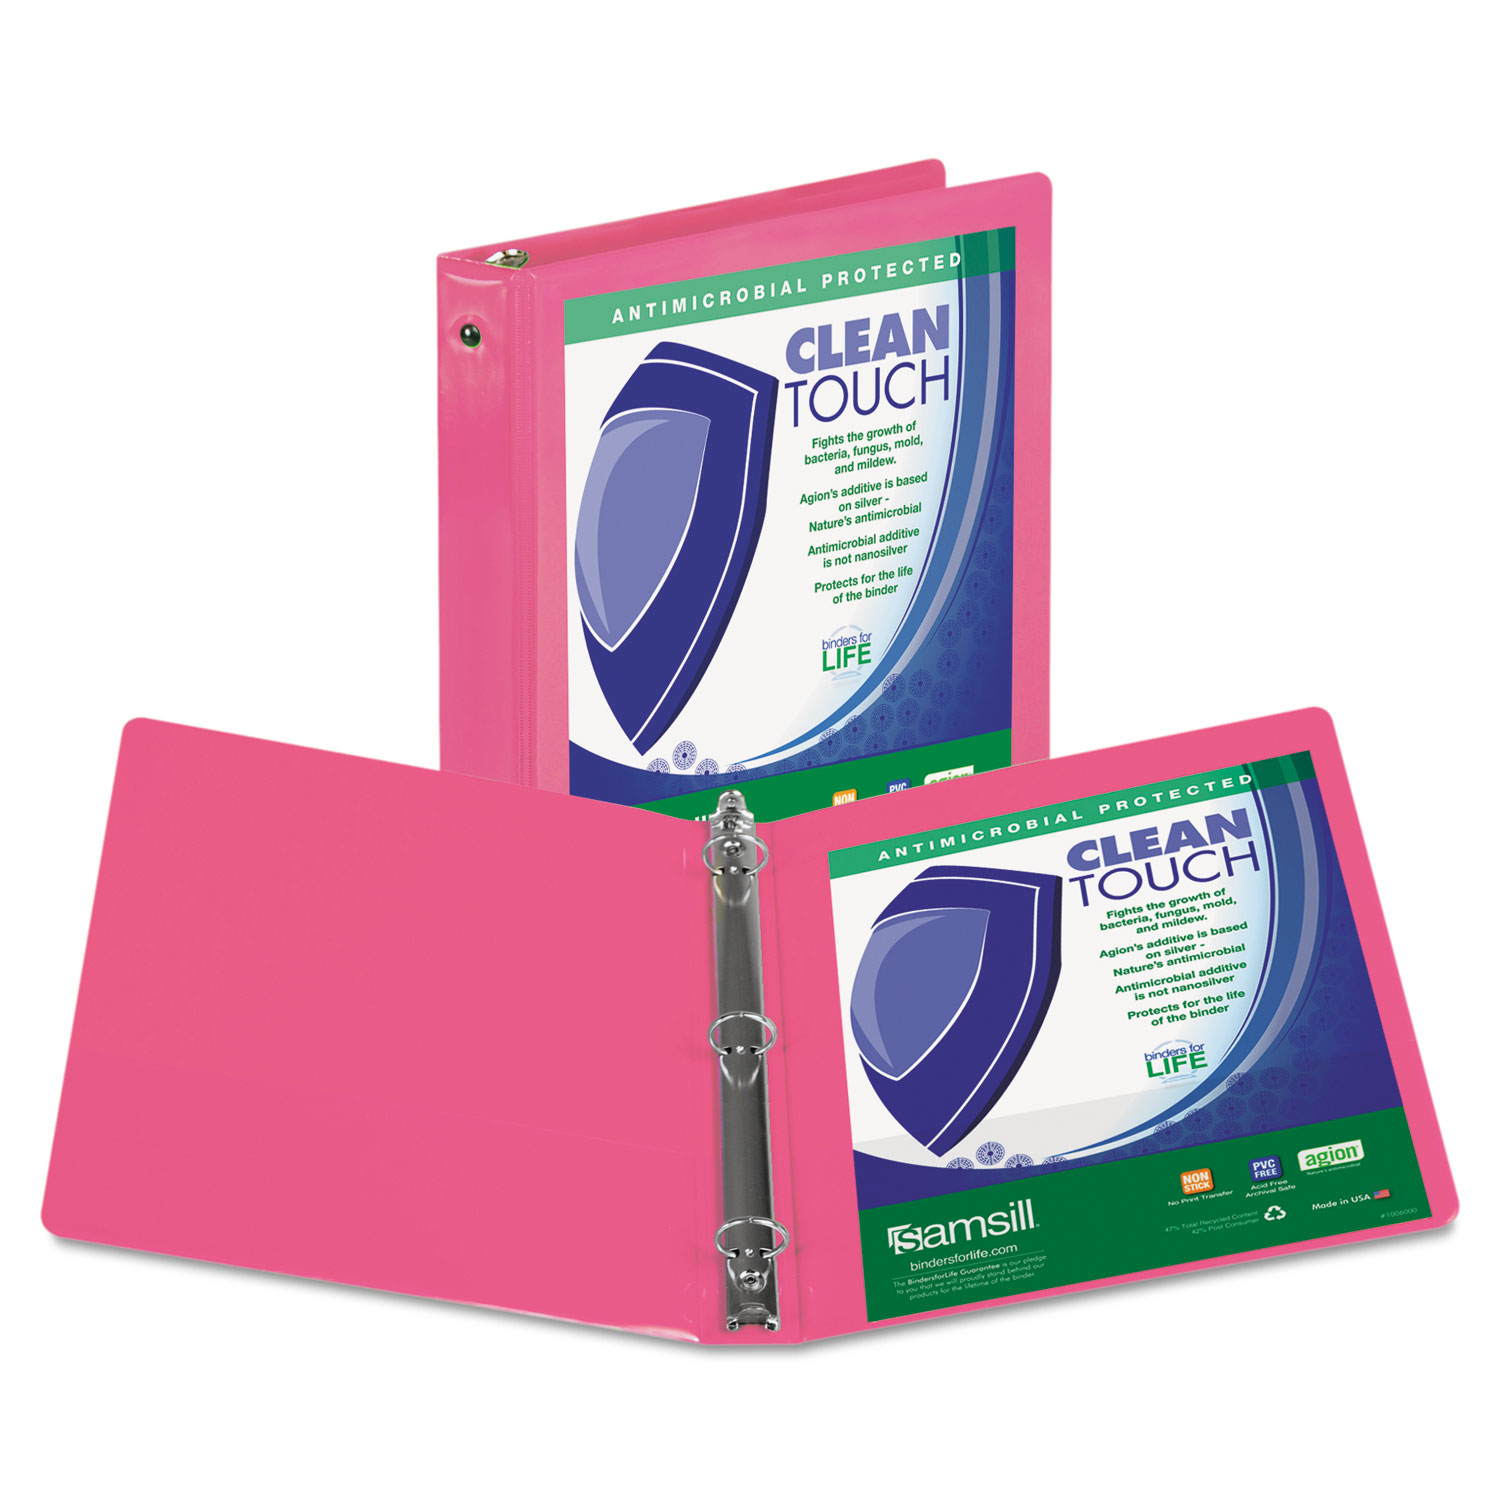 Clean Touch Round Ring View Binder, Antimicrobial, 4, Berry